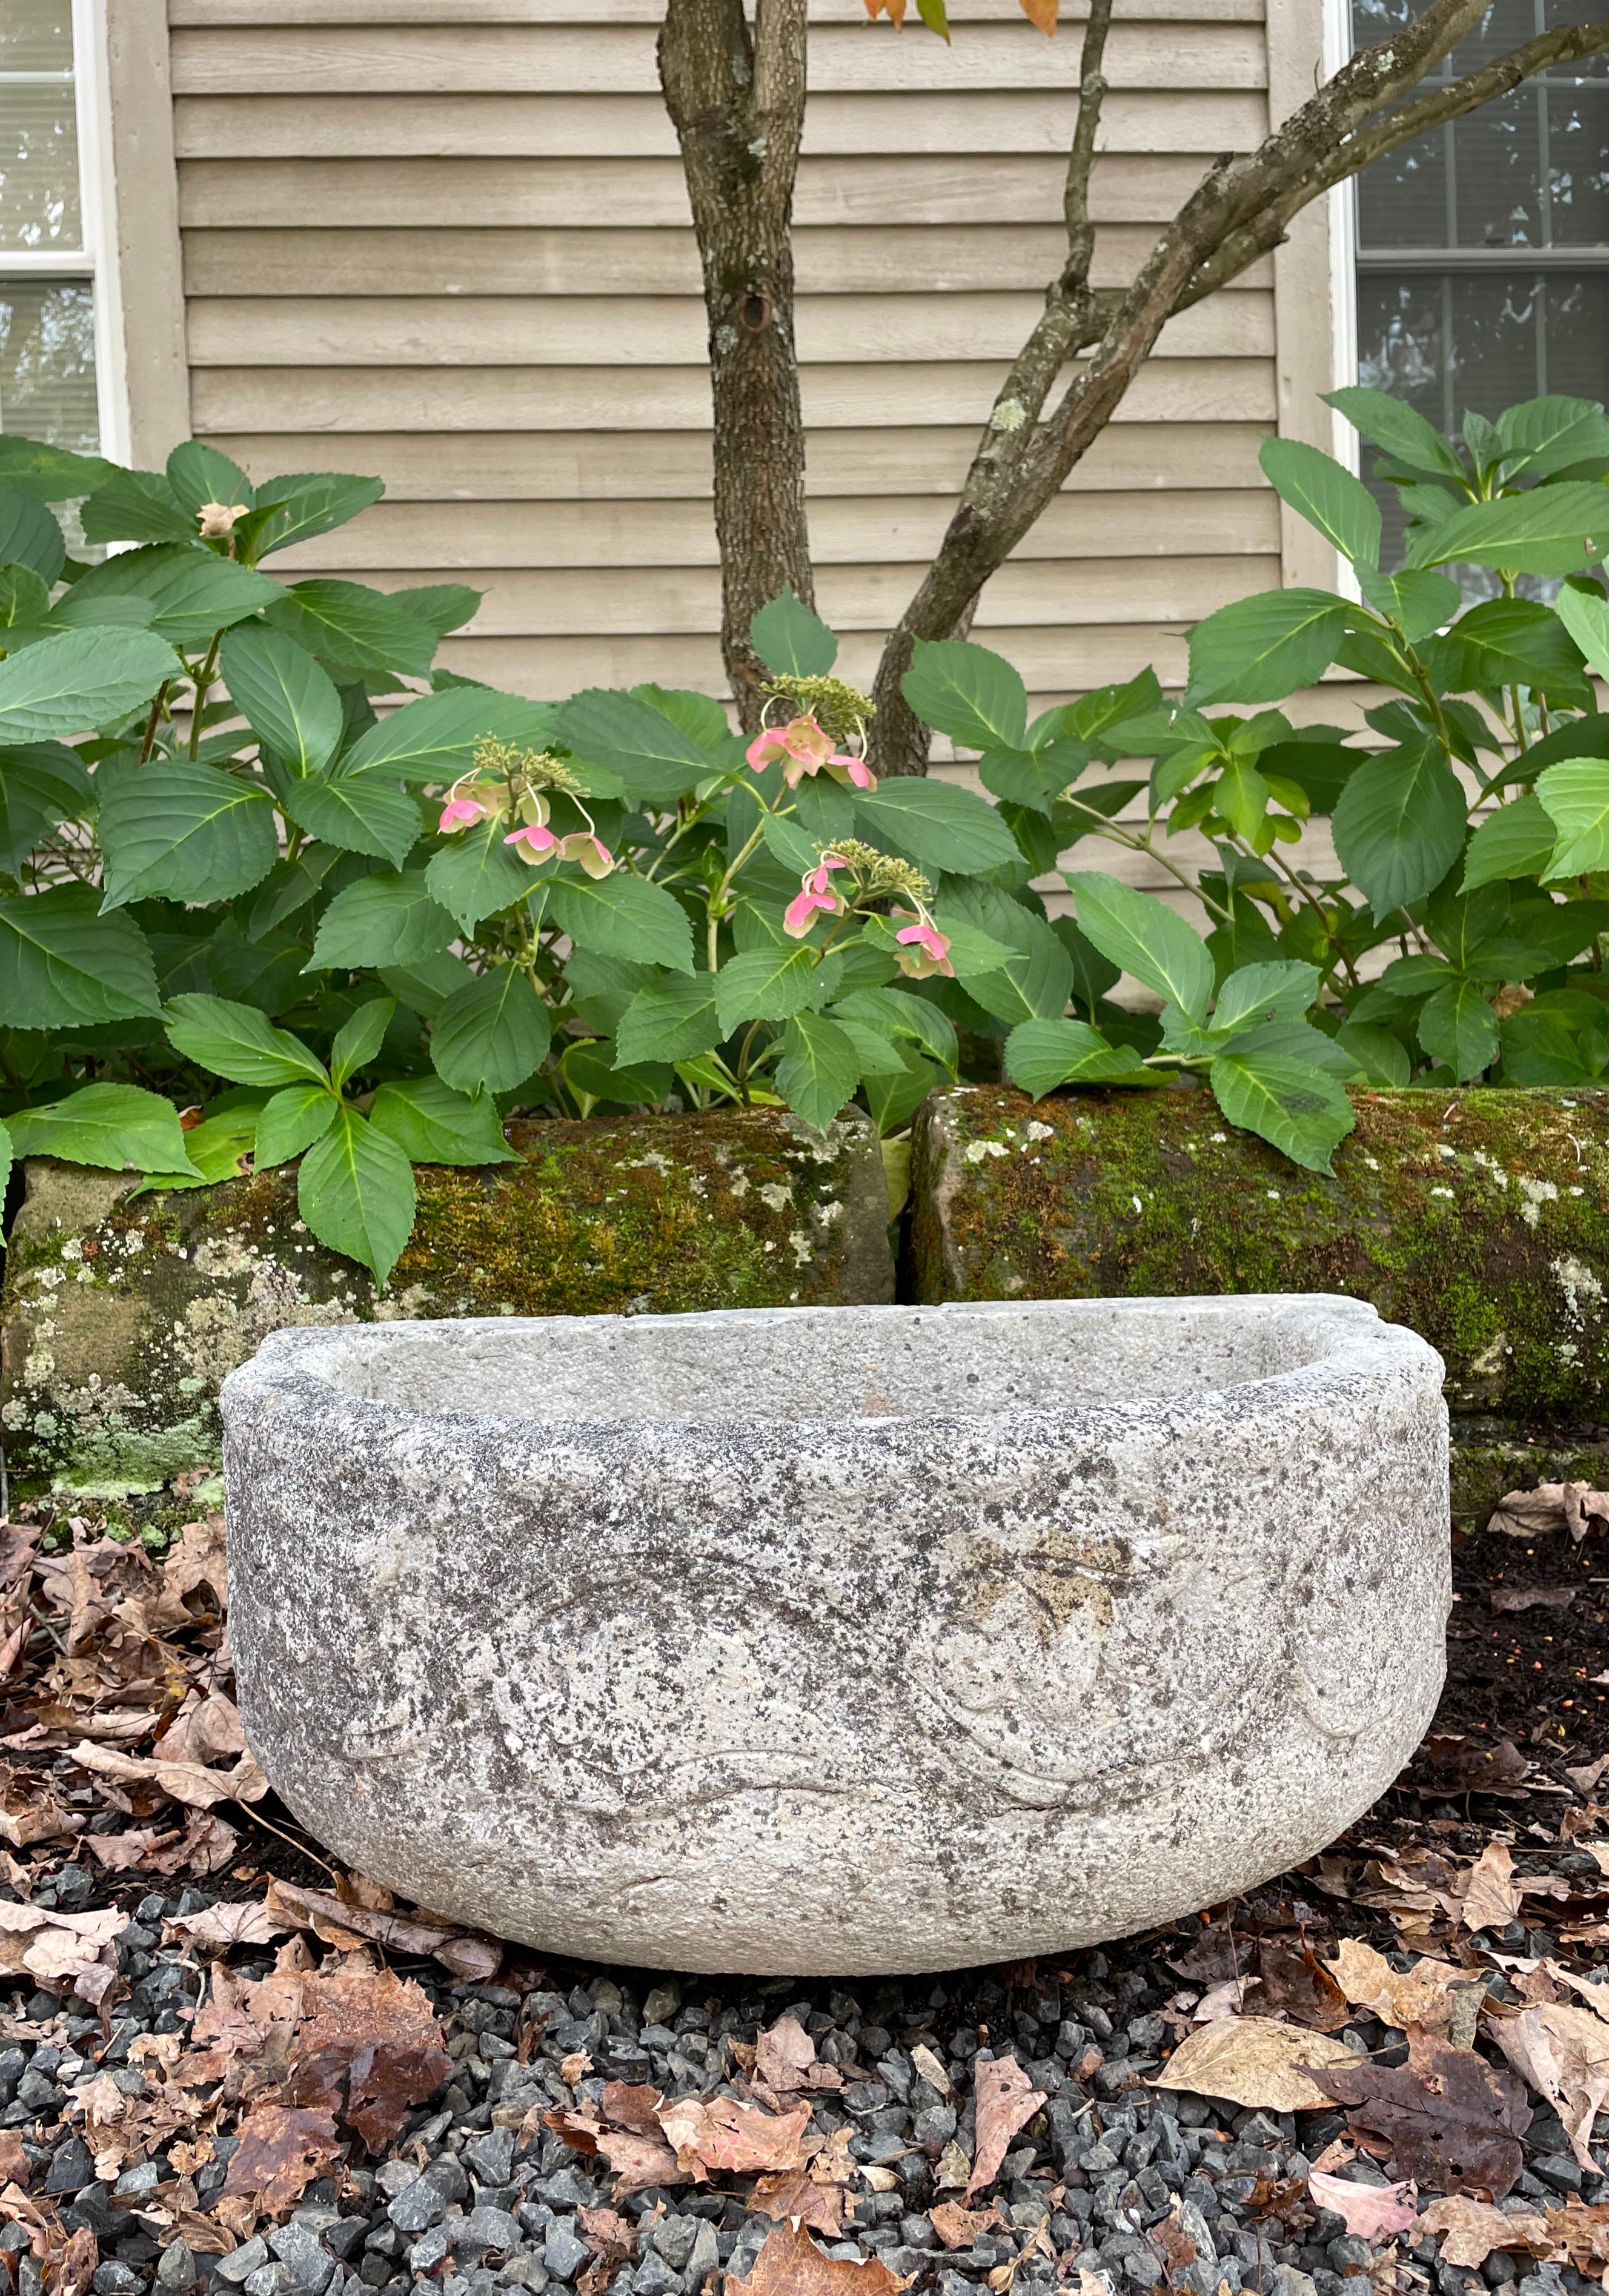 Antique stone basins are always in demand and this one is a beauty! Featuring incised scrolls on the front radius that makes it appear older than it is, this basin has a beautifully-weathered patina and its size and form will lend an ancient note to